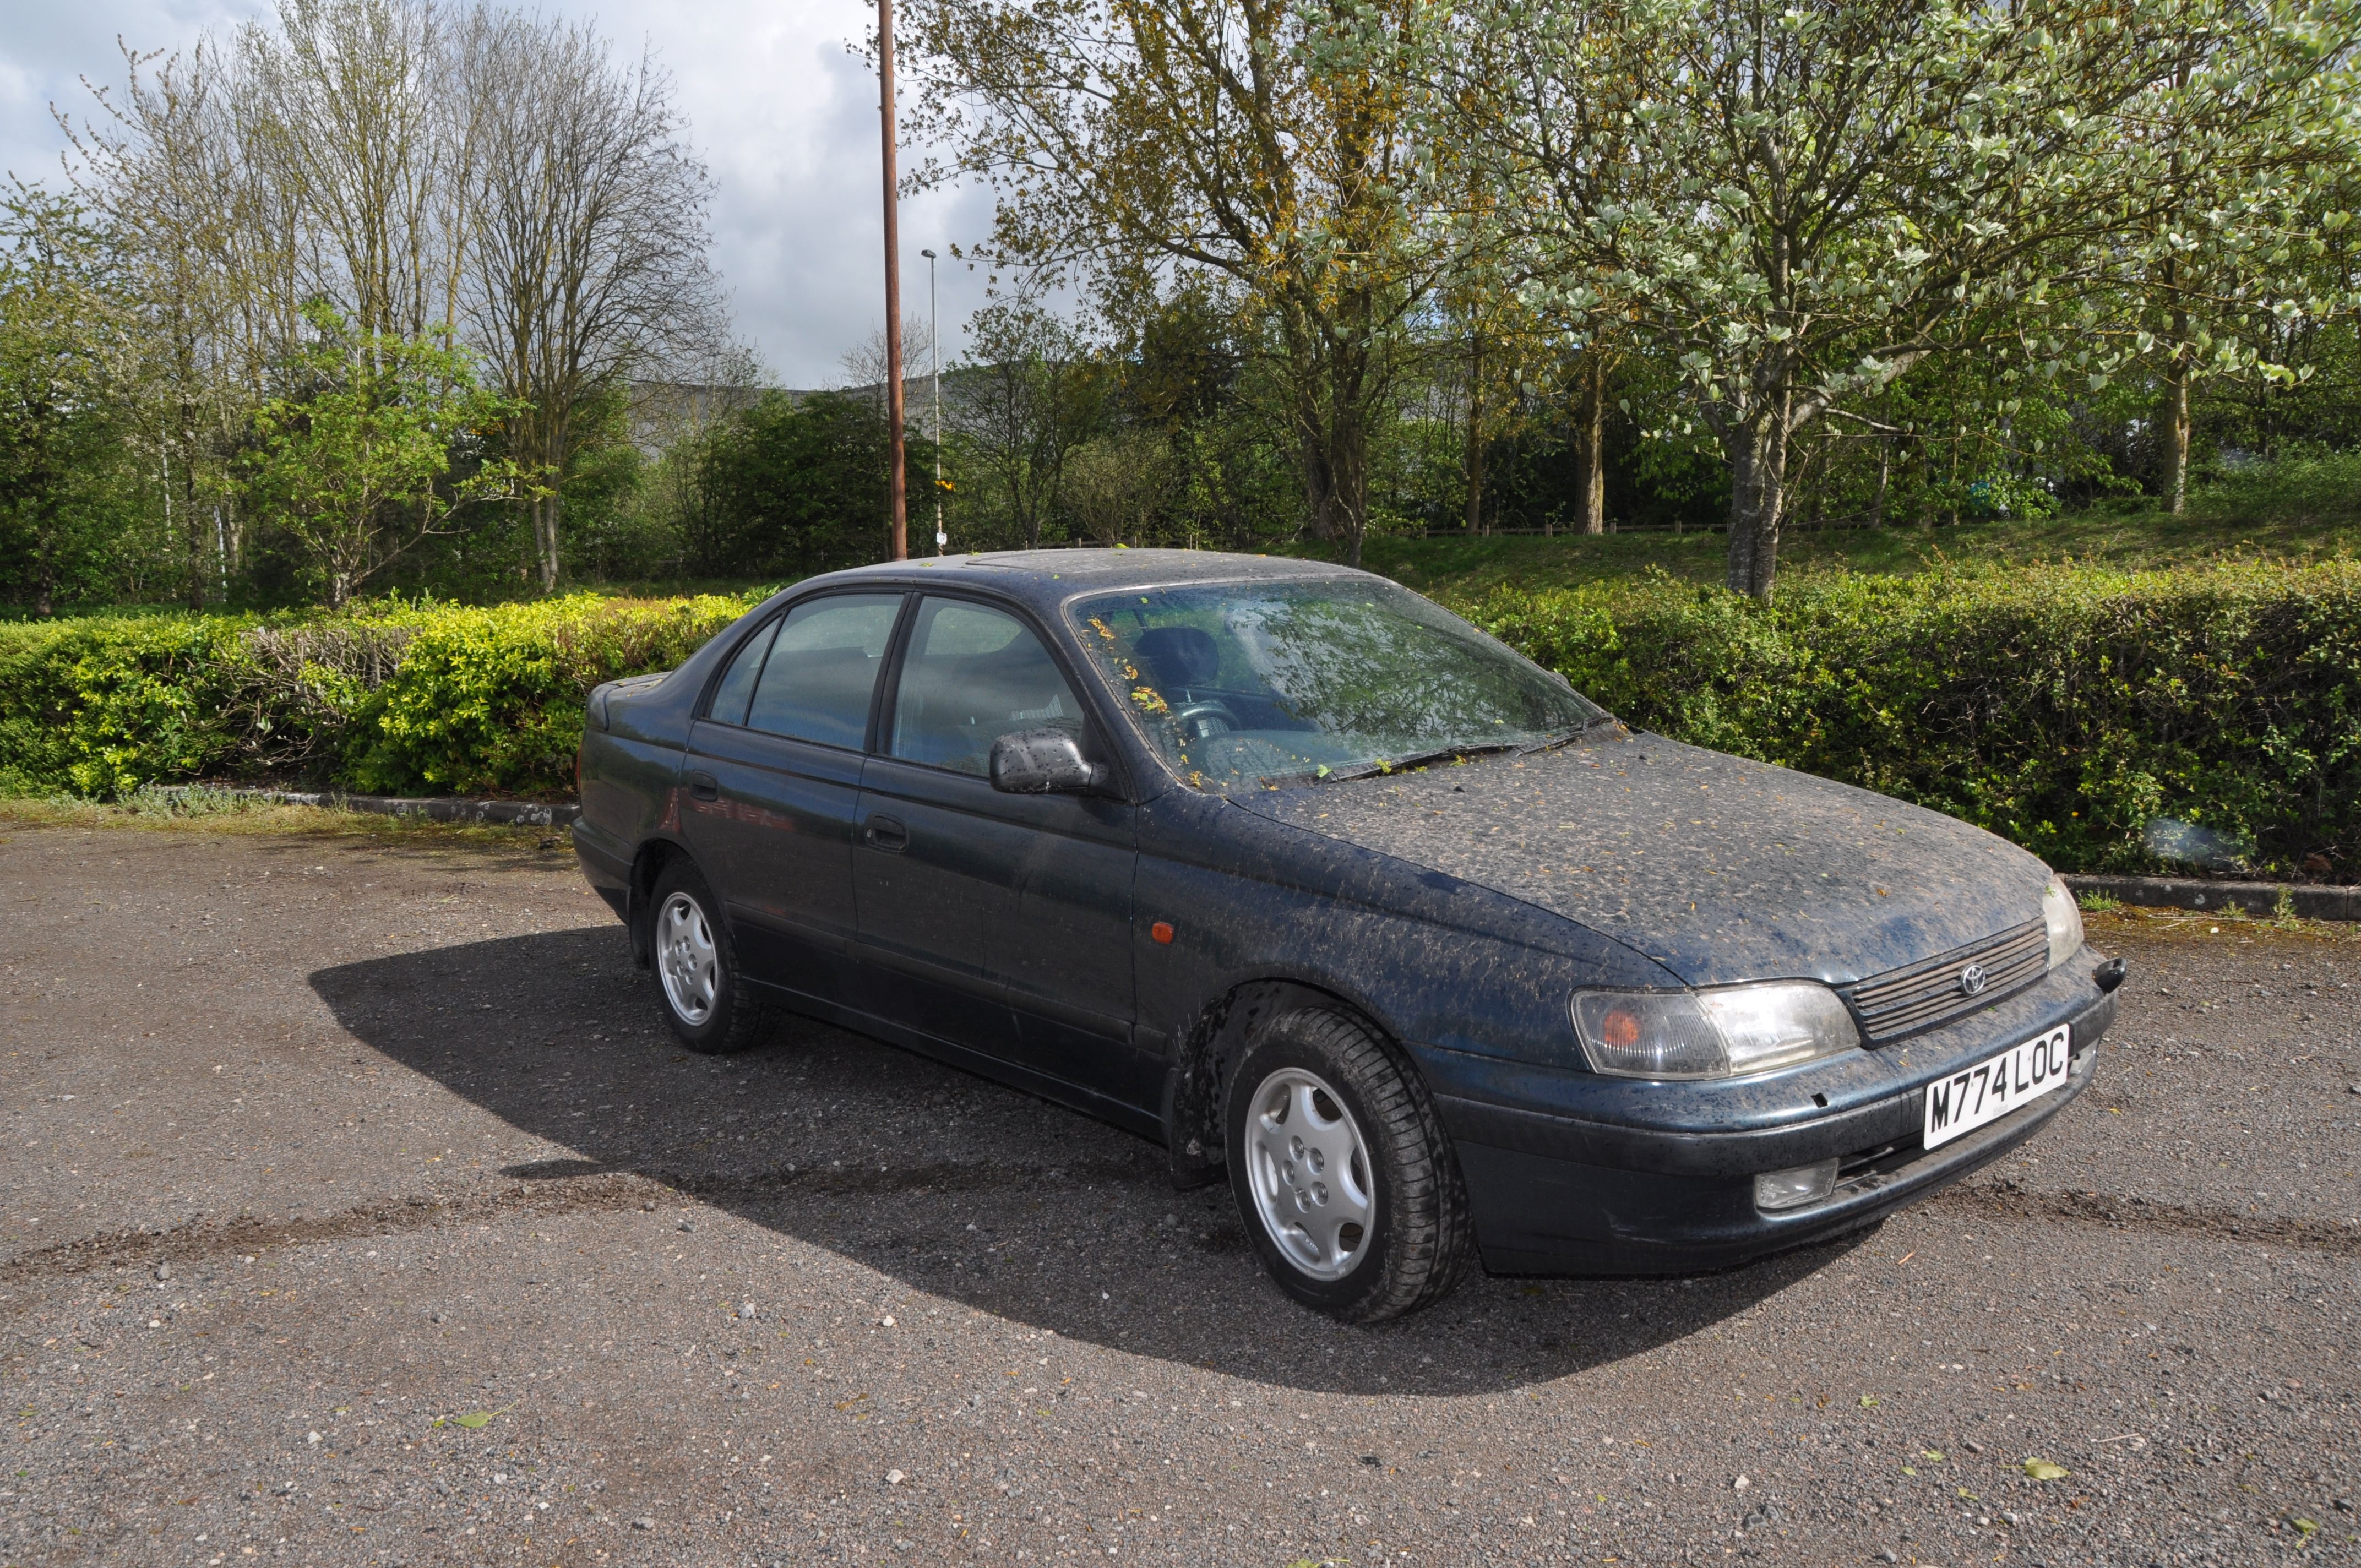 A 1994 TOYOTA CARINA E EXECUTIVE A FOUR DOOR SALOON CAR in blue, first registered 30/9/1994 under